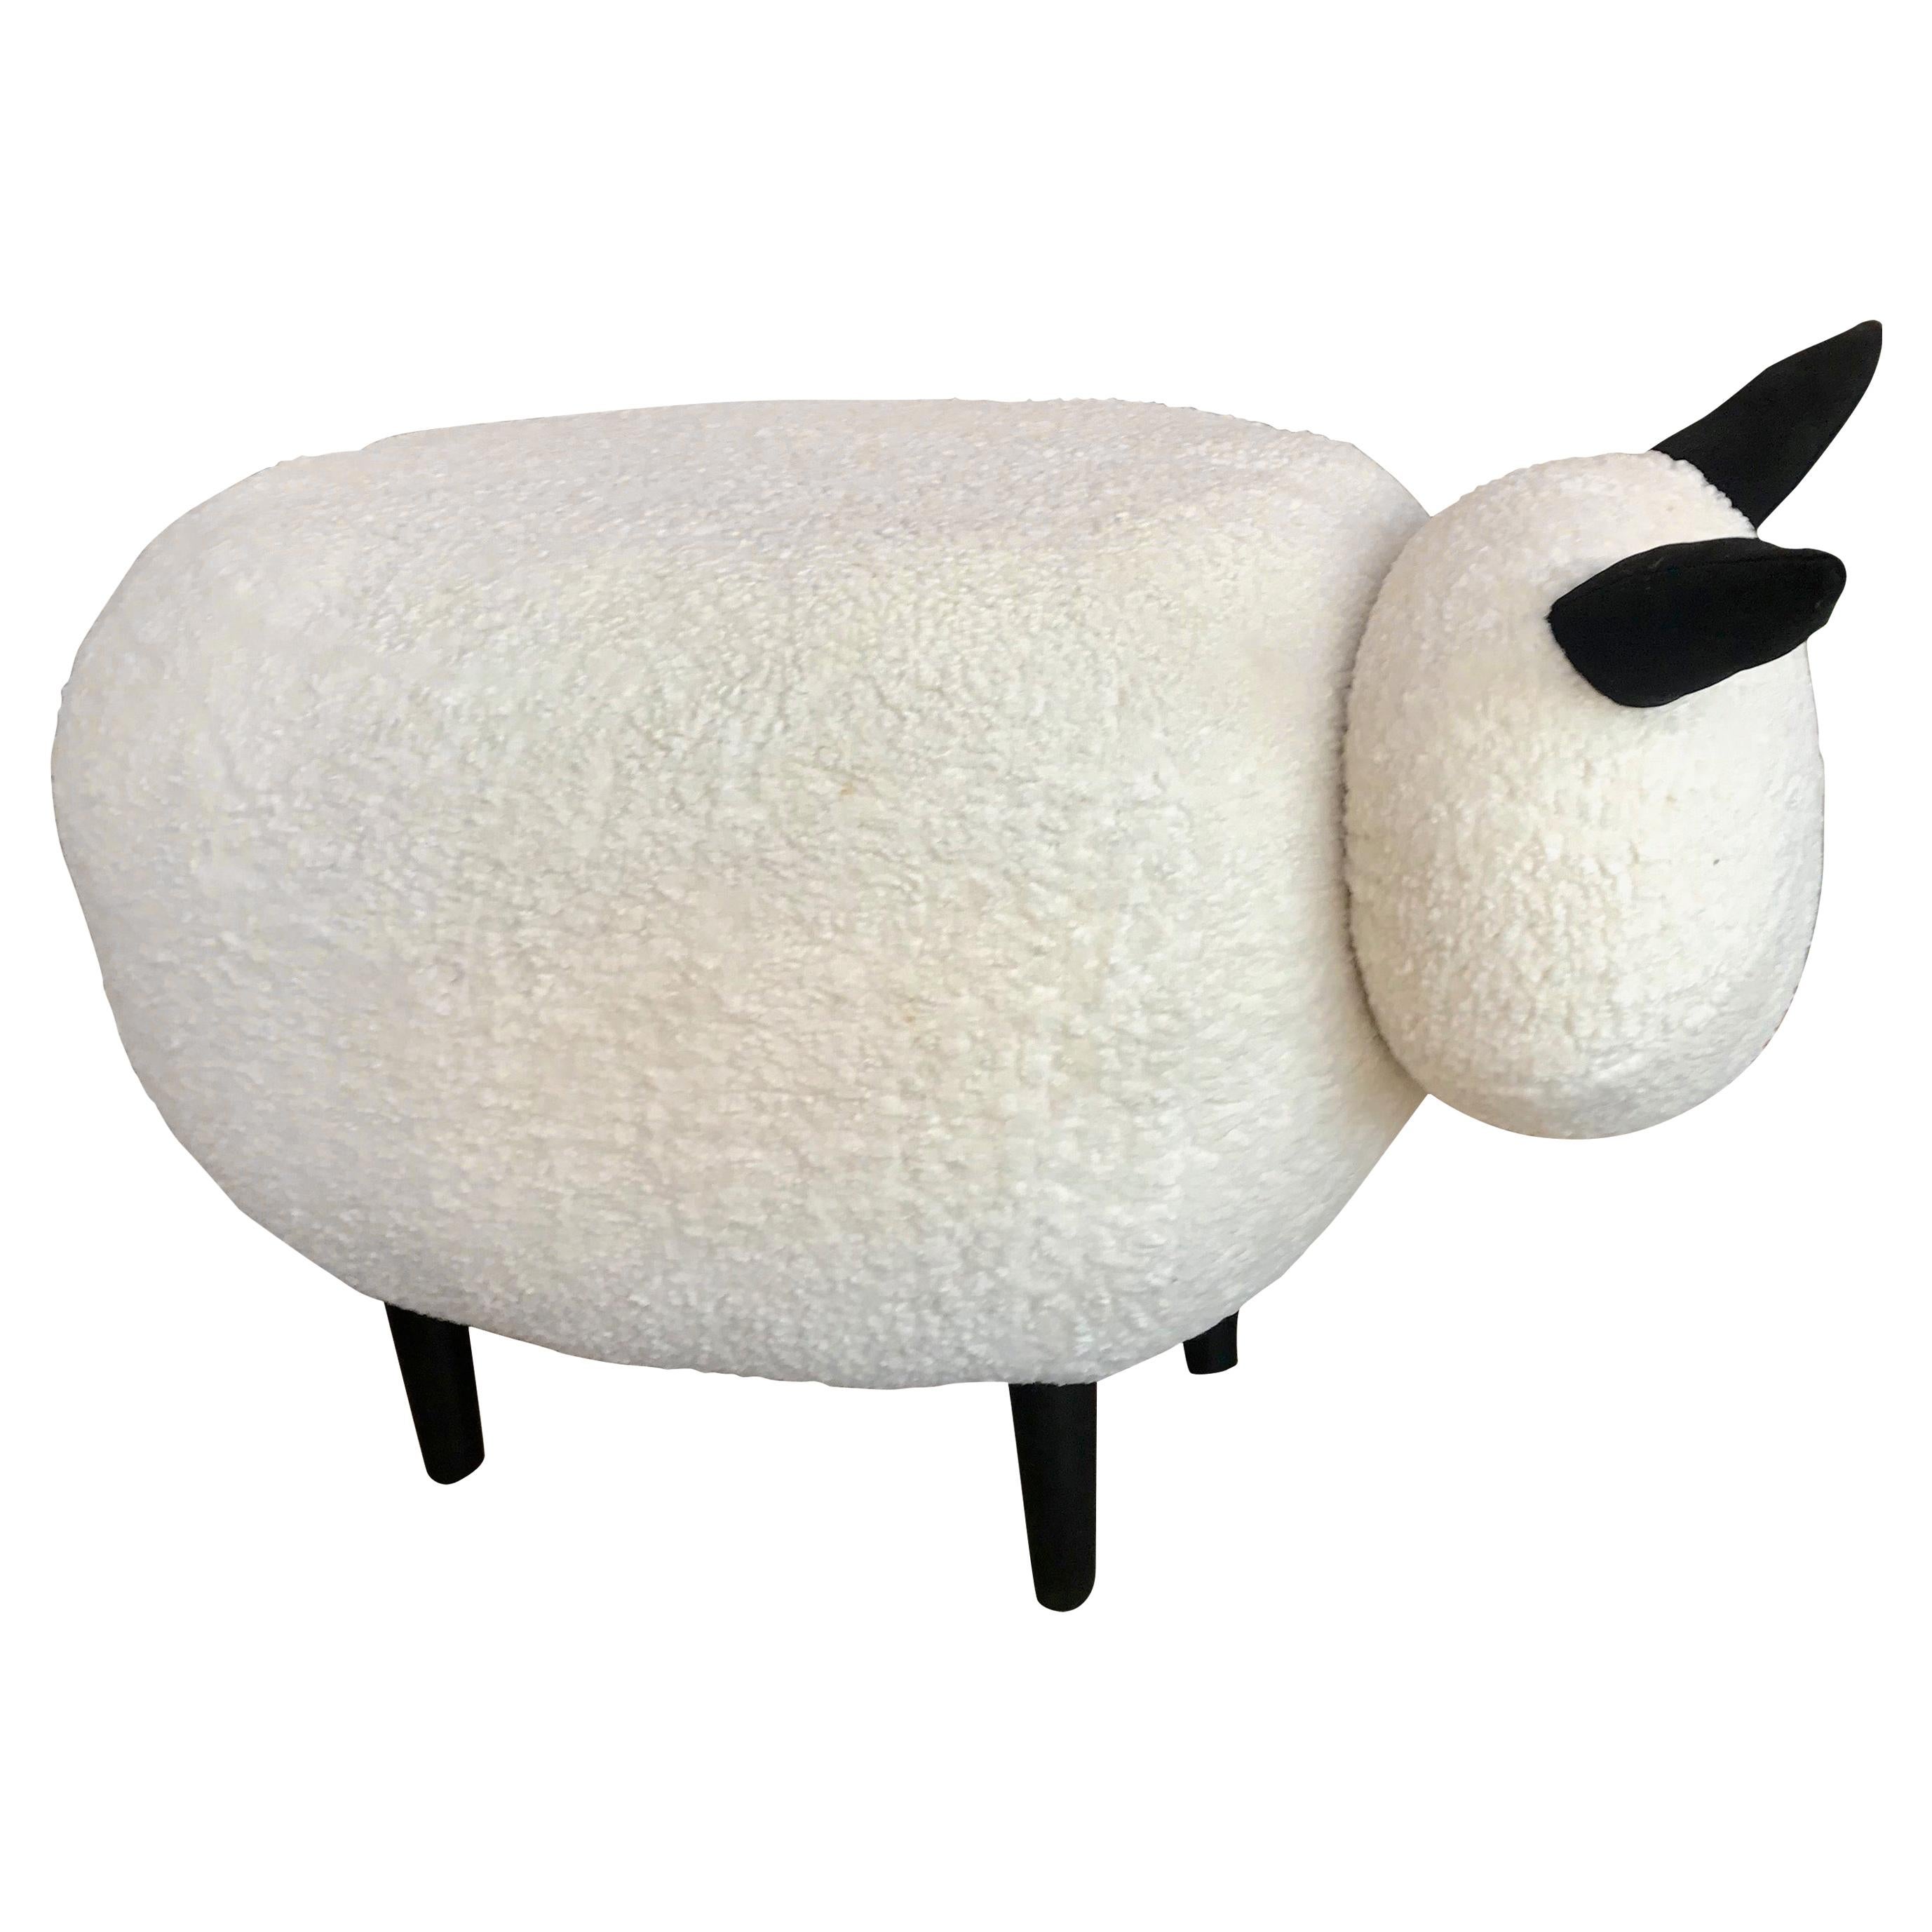 Ma39 Pouf in Carved Wood Sheep, Italy, 21st Century